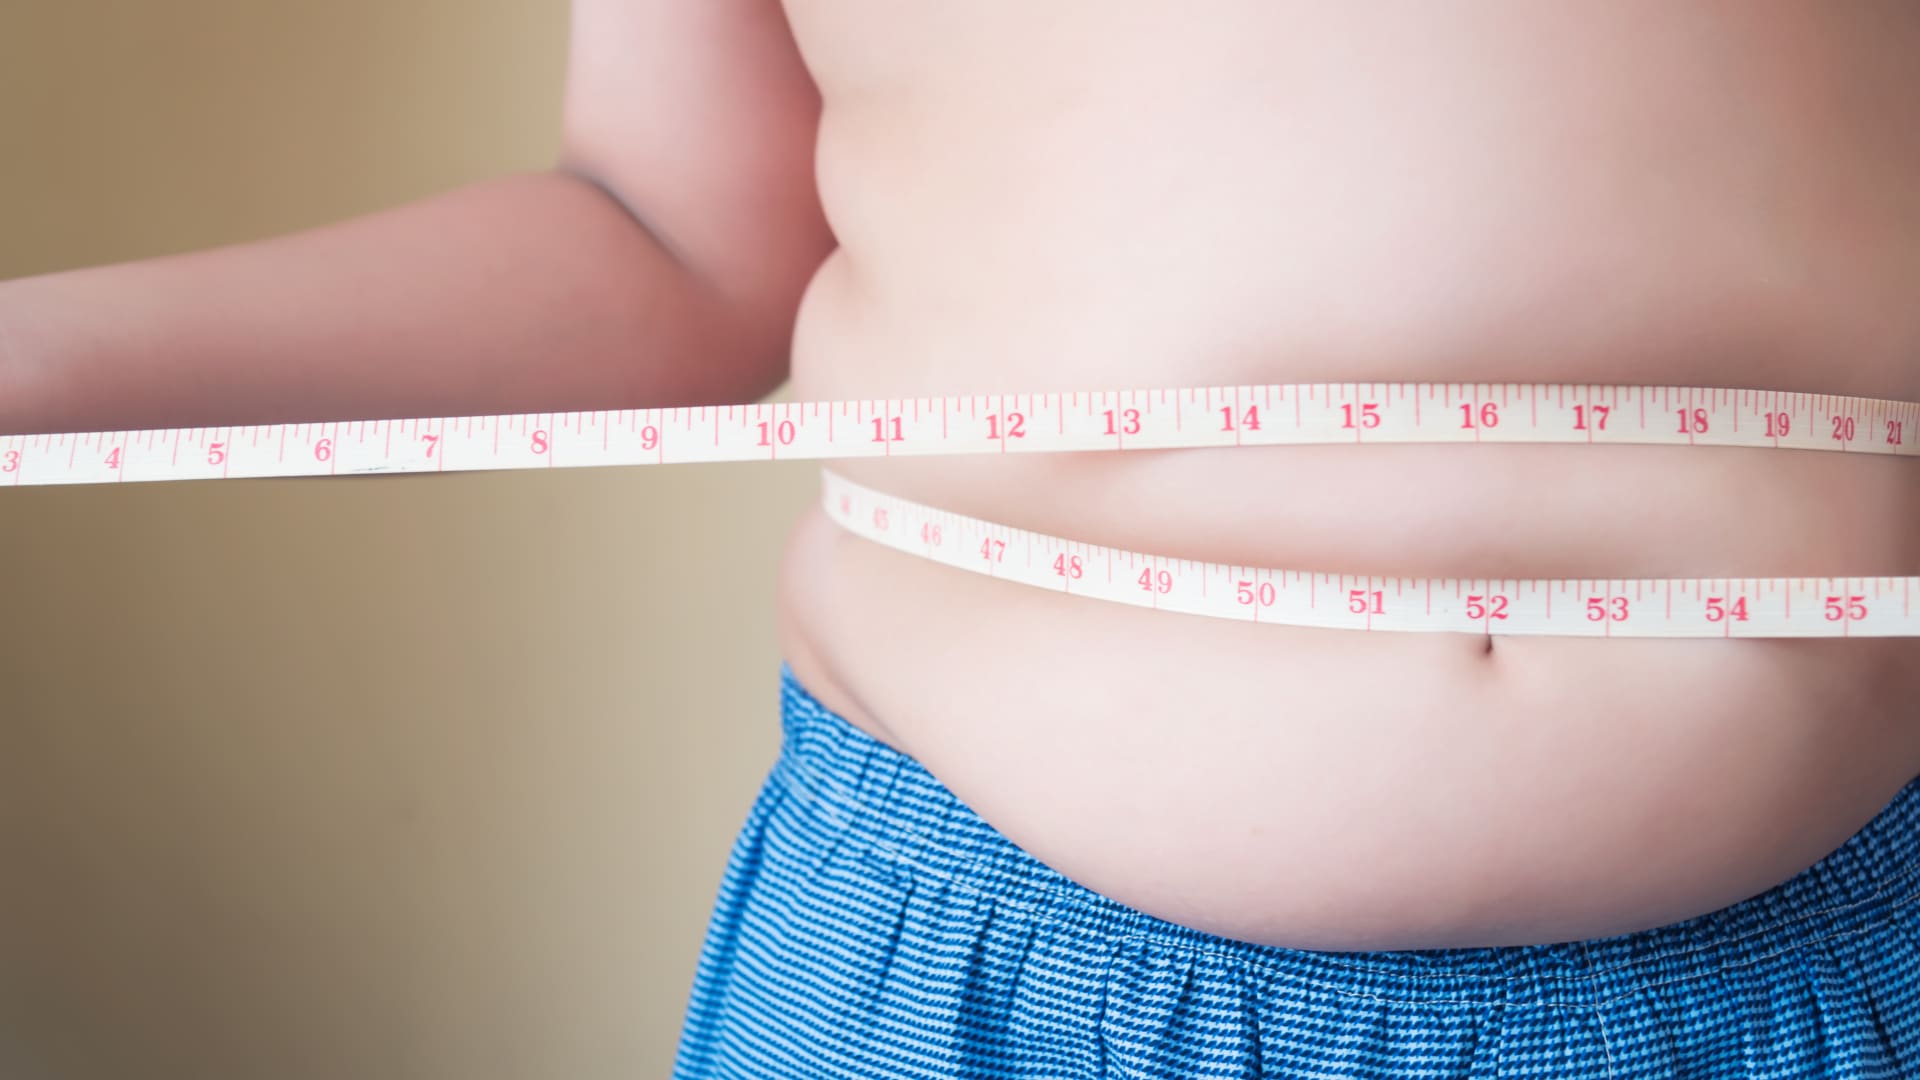 Growing obesity crisis in U.S. prompts CDC to expand body mass index charts for severely overweight kids